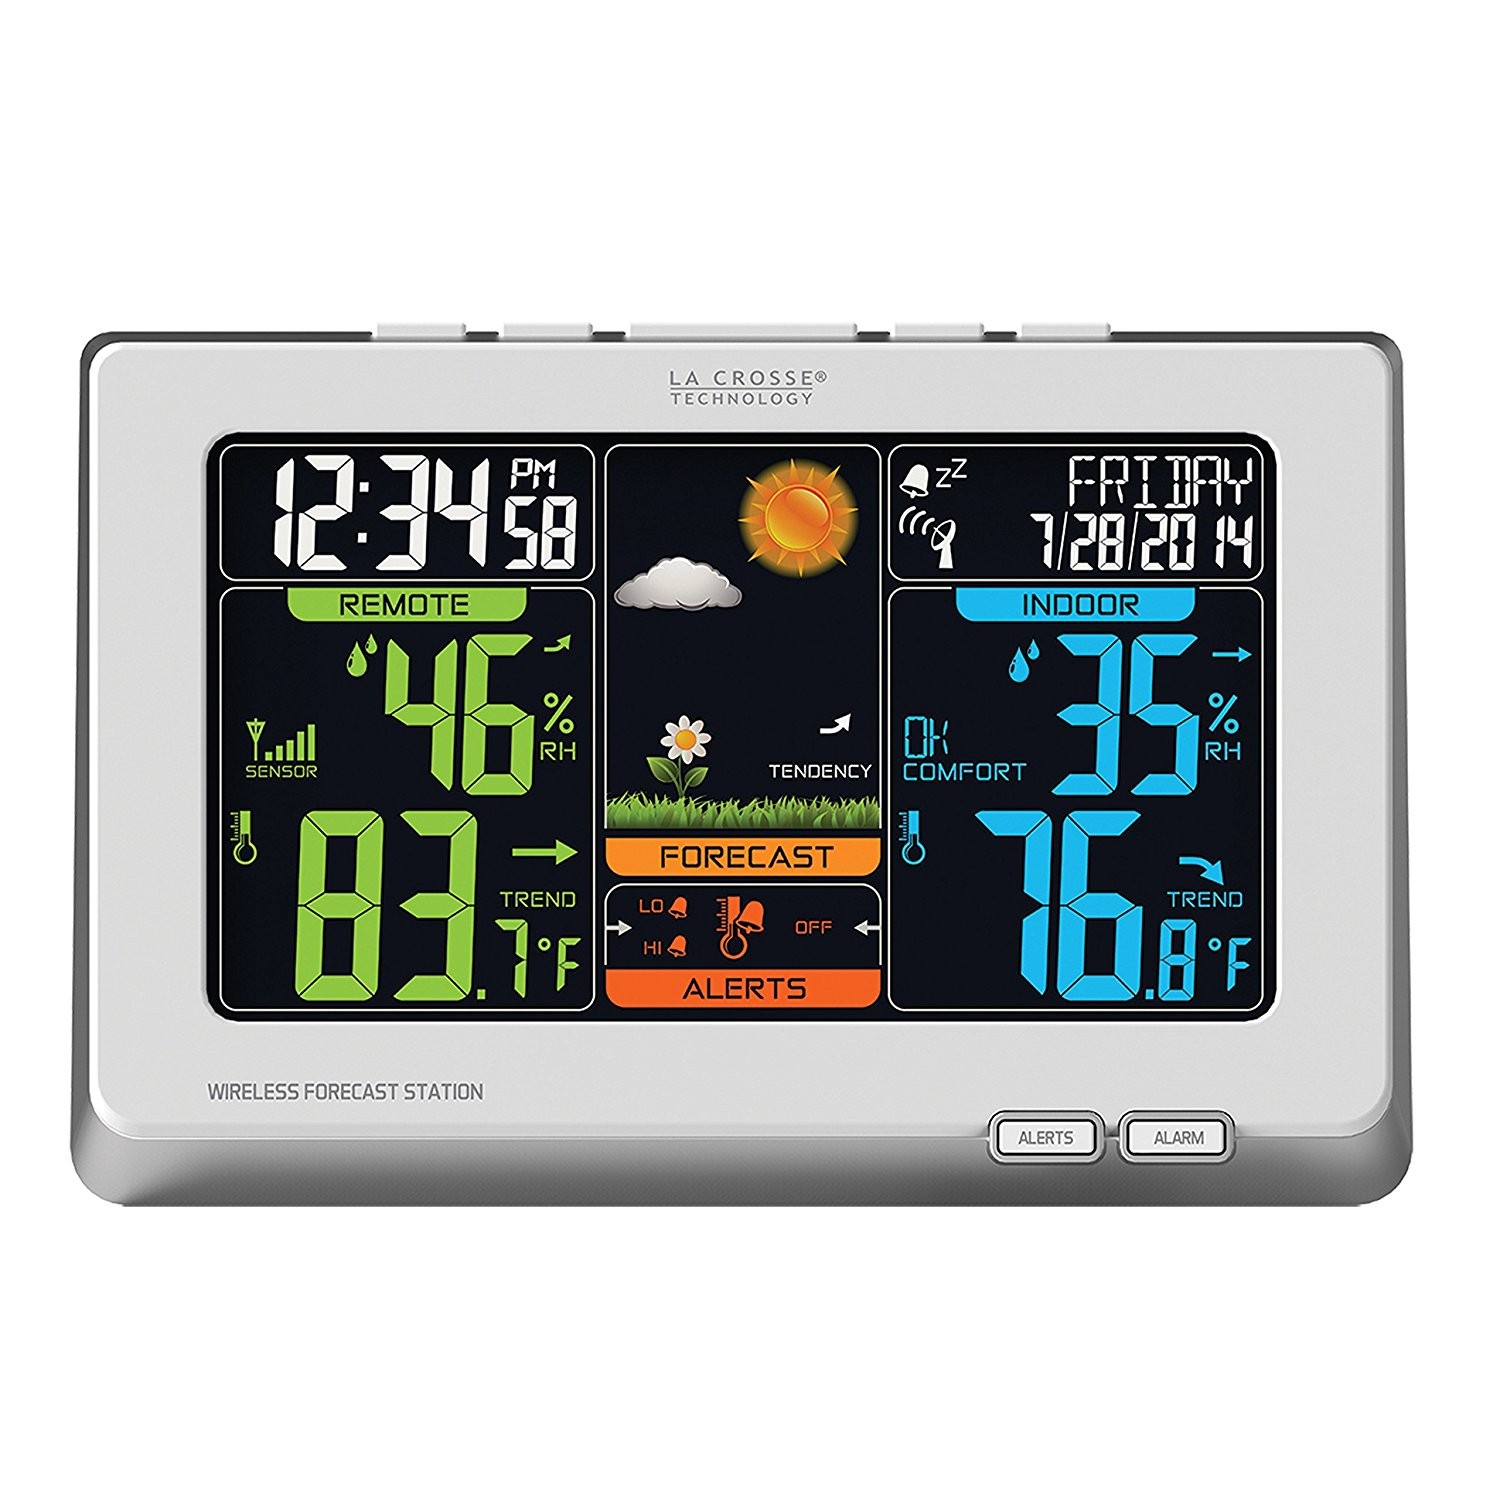 La Crosse Technology C83332 Wireless Atomic Digital Color Forecast Station with Alerts, White